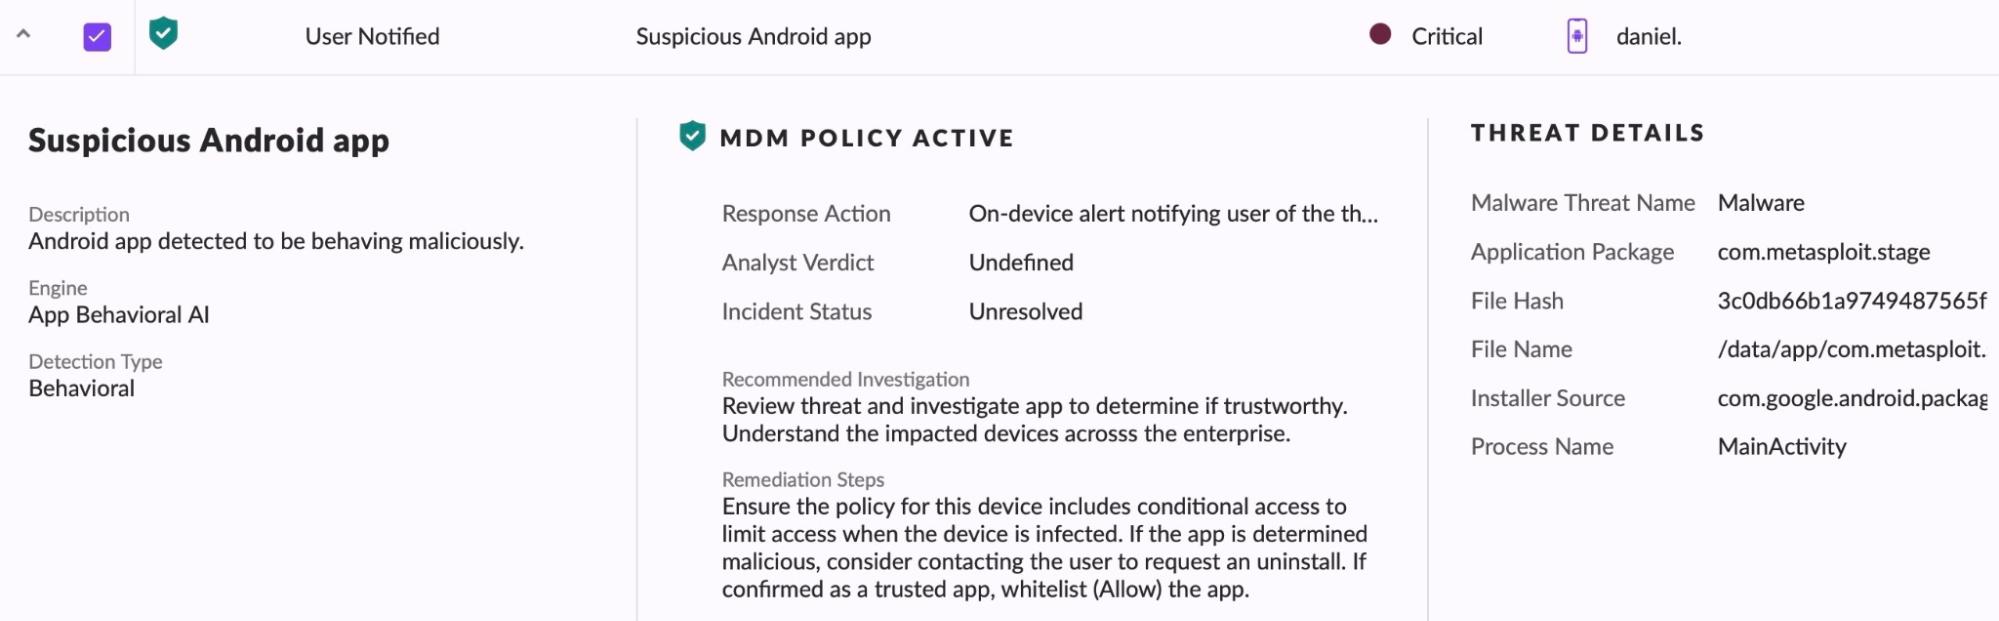 Singularity Mobile and Microsoft Intune suspicious android app